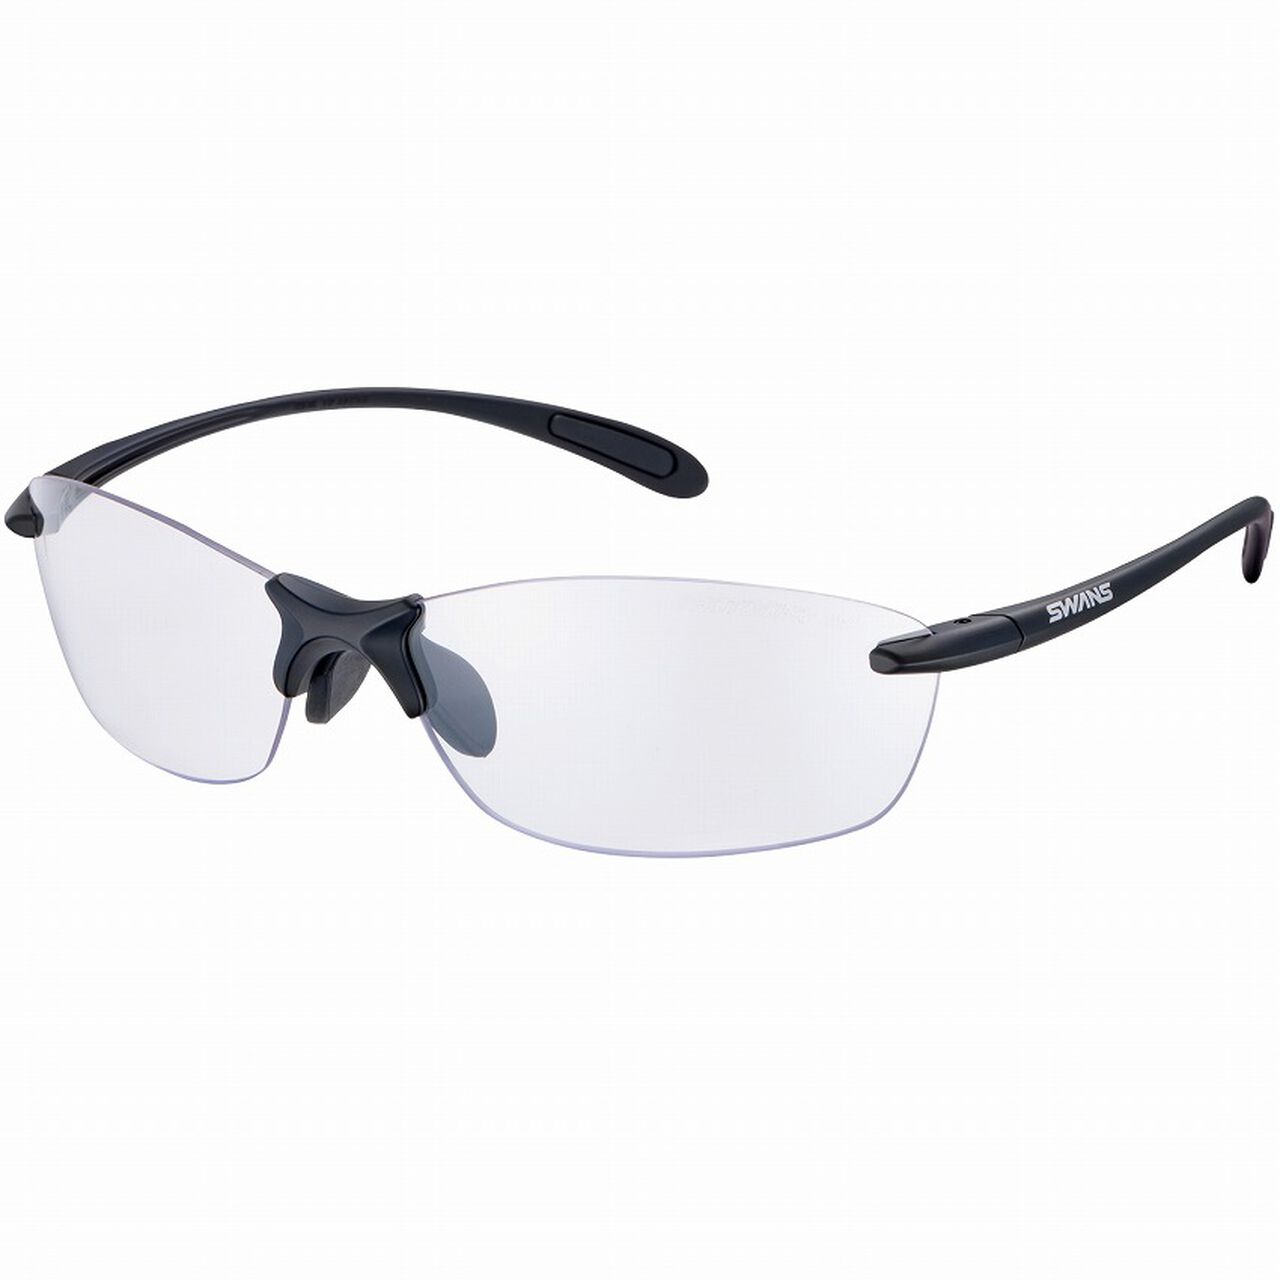 SA-Fit AMZ-SALF-0066 MBK Photochromic Clear to Smoke,Opt13, large image number 0